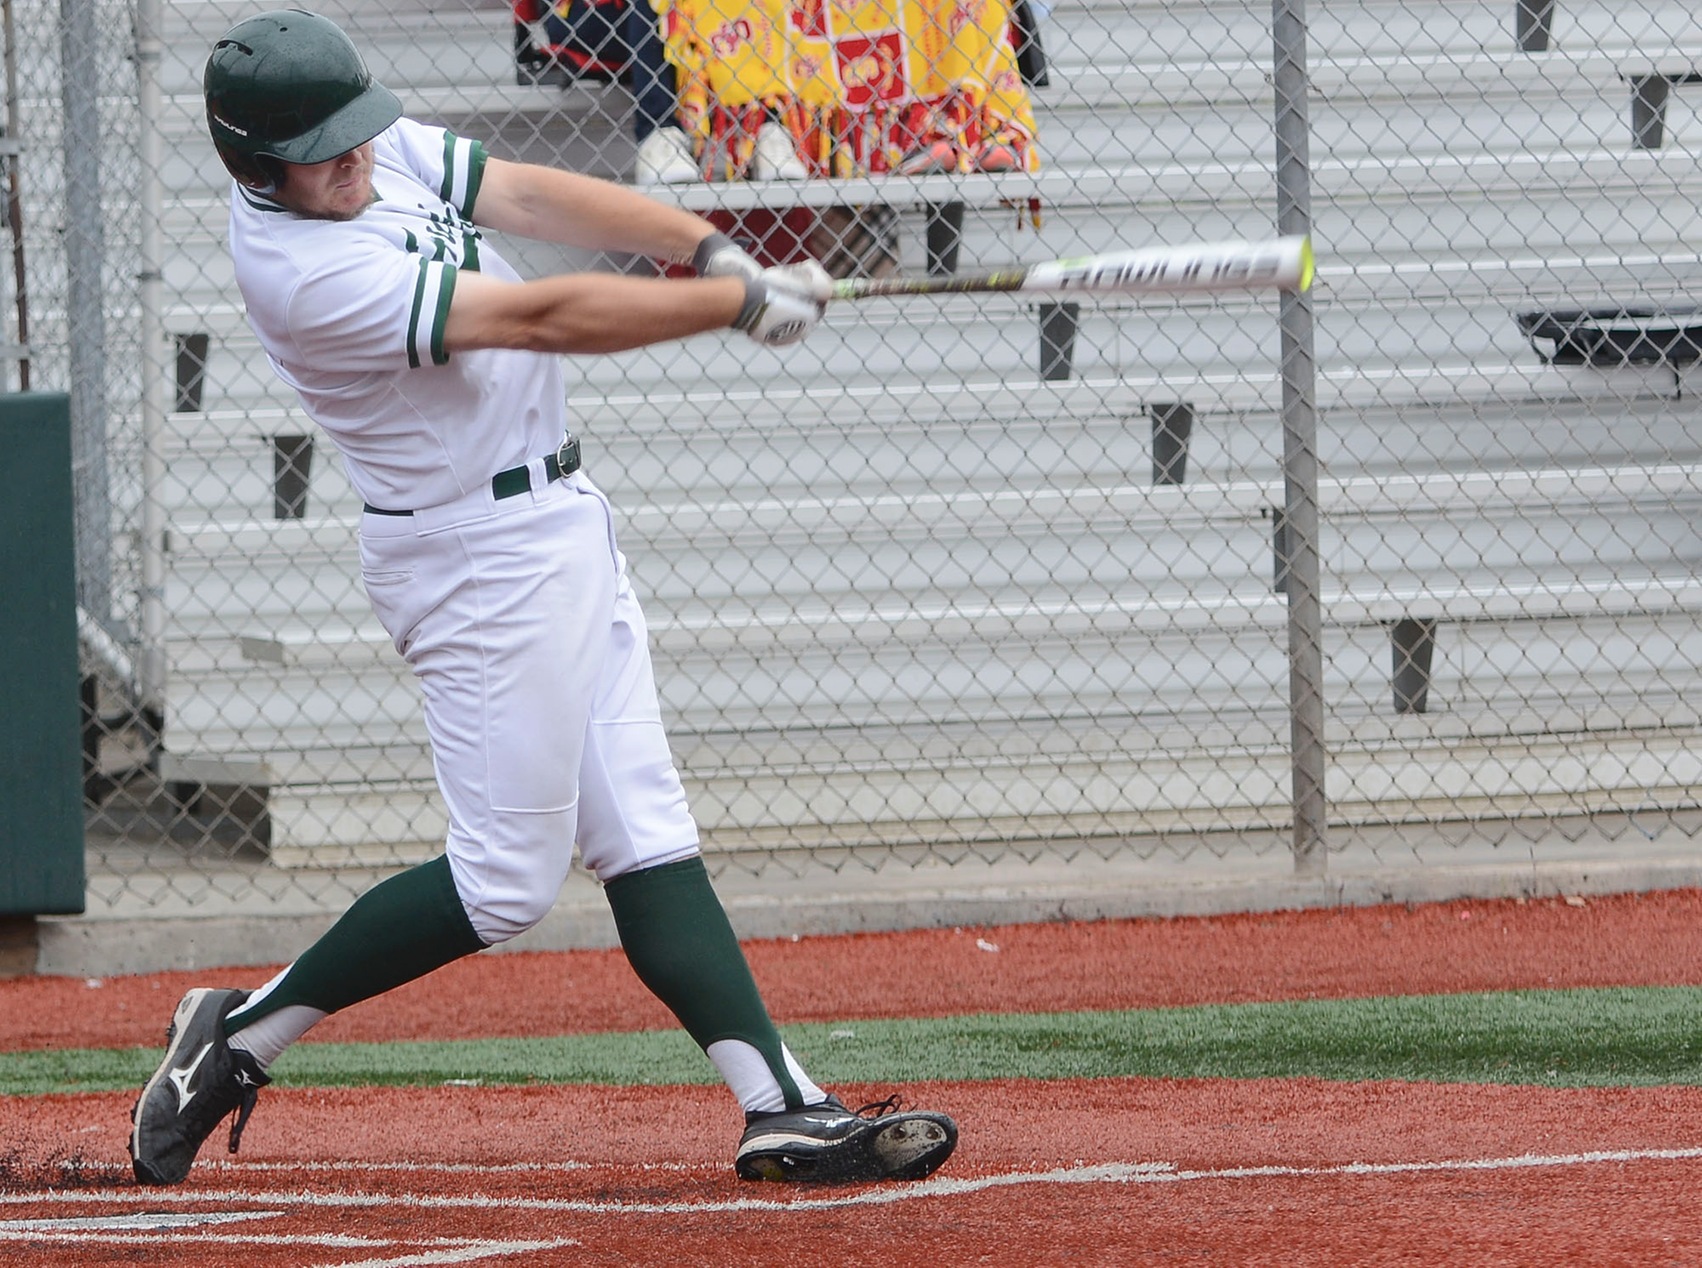 East Los Angeles College center fielder Kyle Francis hits a 2-RBI triple with this swing and added the winning sacrifice fly in a 6-5 win vs. Rio Hondo College. (Photo by Tadzio Garcia)